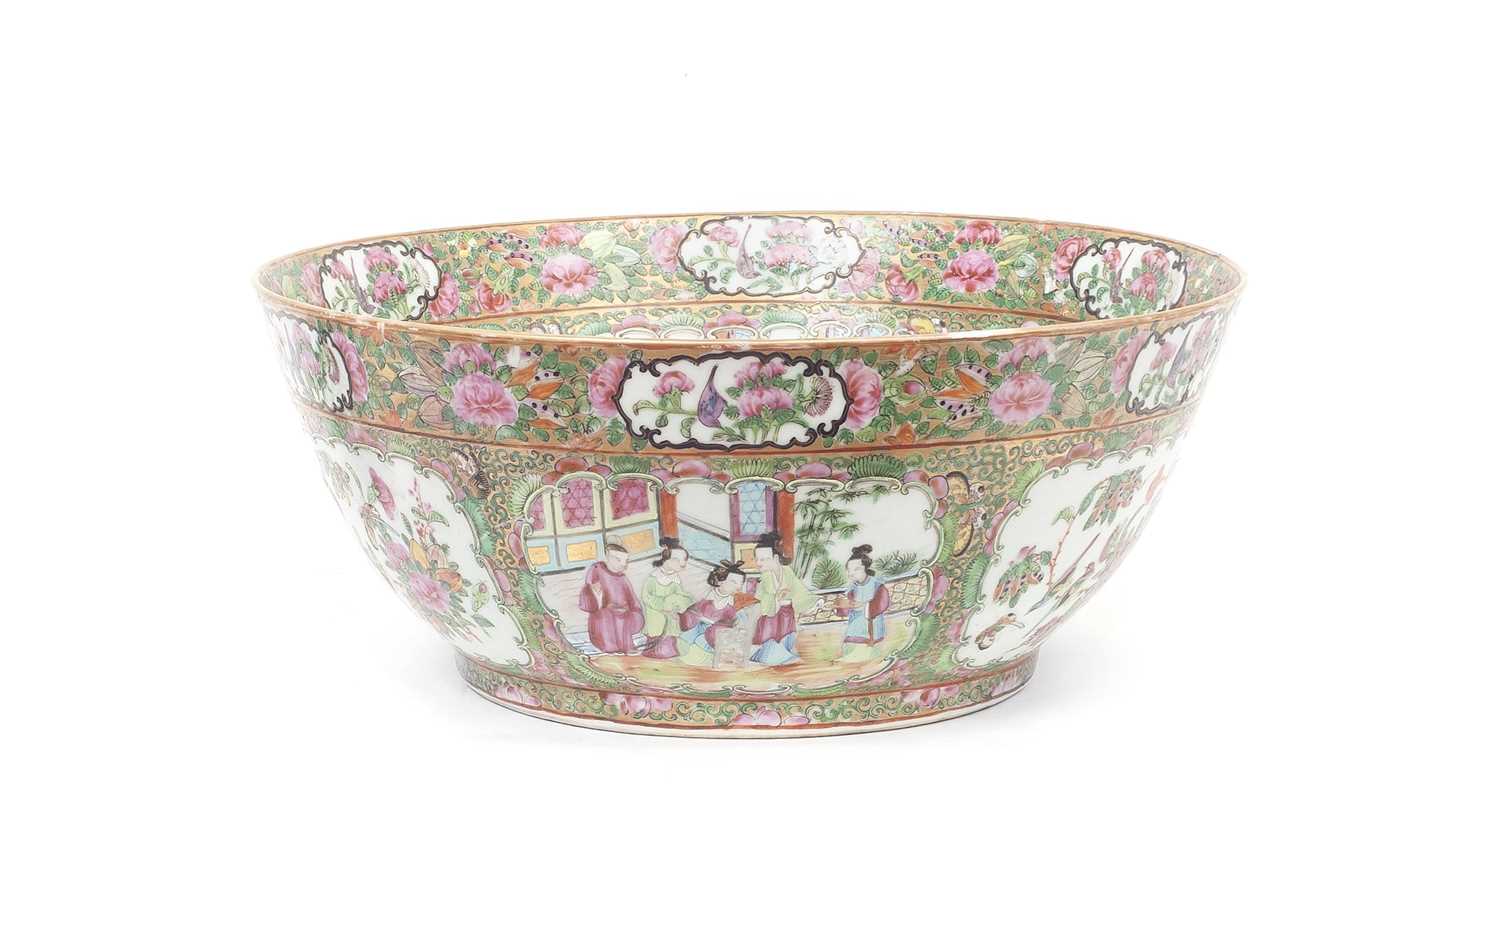 A LARGE LATE 19TH CENTURY CHINESE CANTON PORCELAIN BOWL